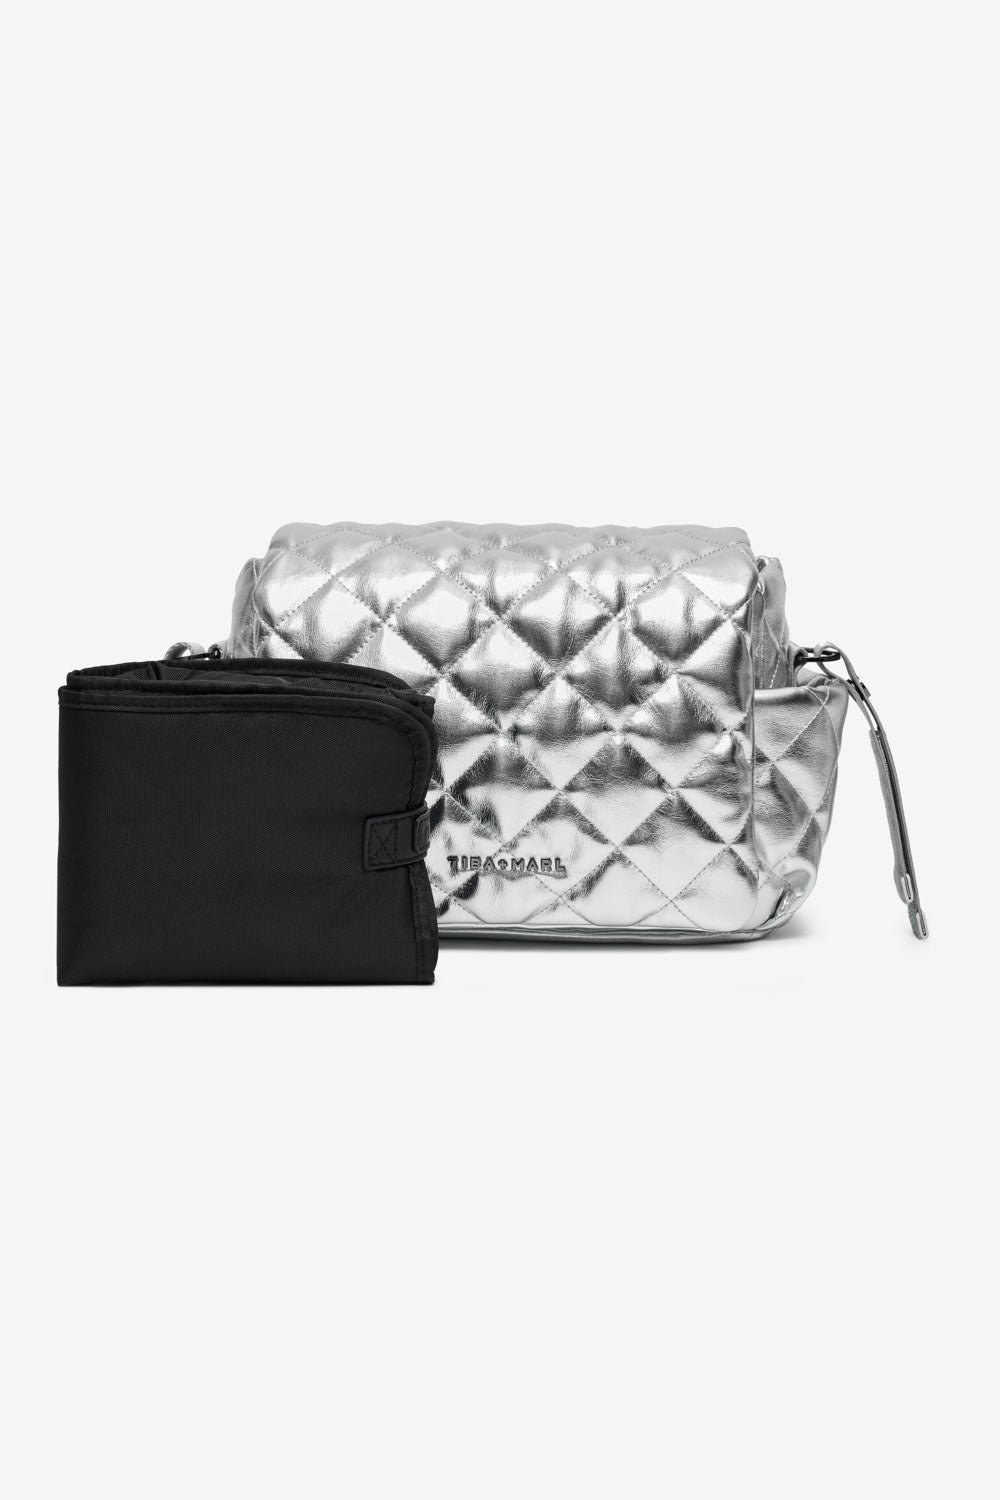 T+M x Selfridges Chain Nova Compact Changing Bag Silver Quilted Faux Leather